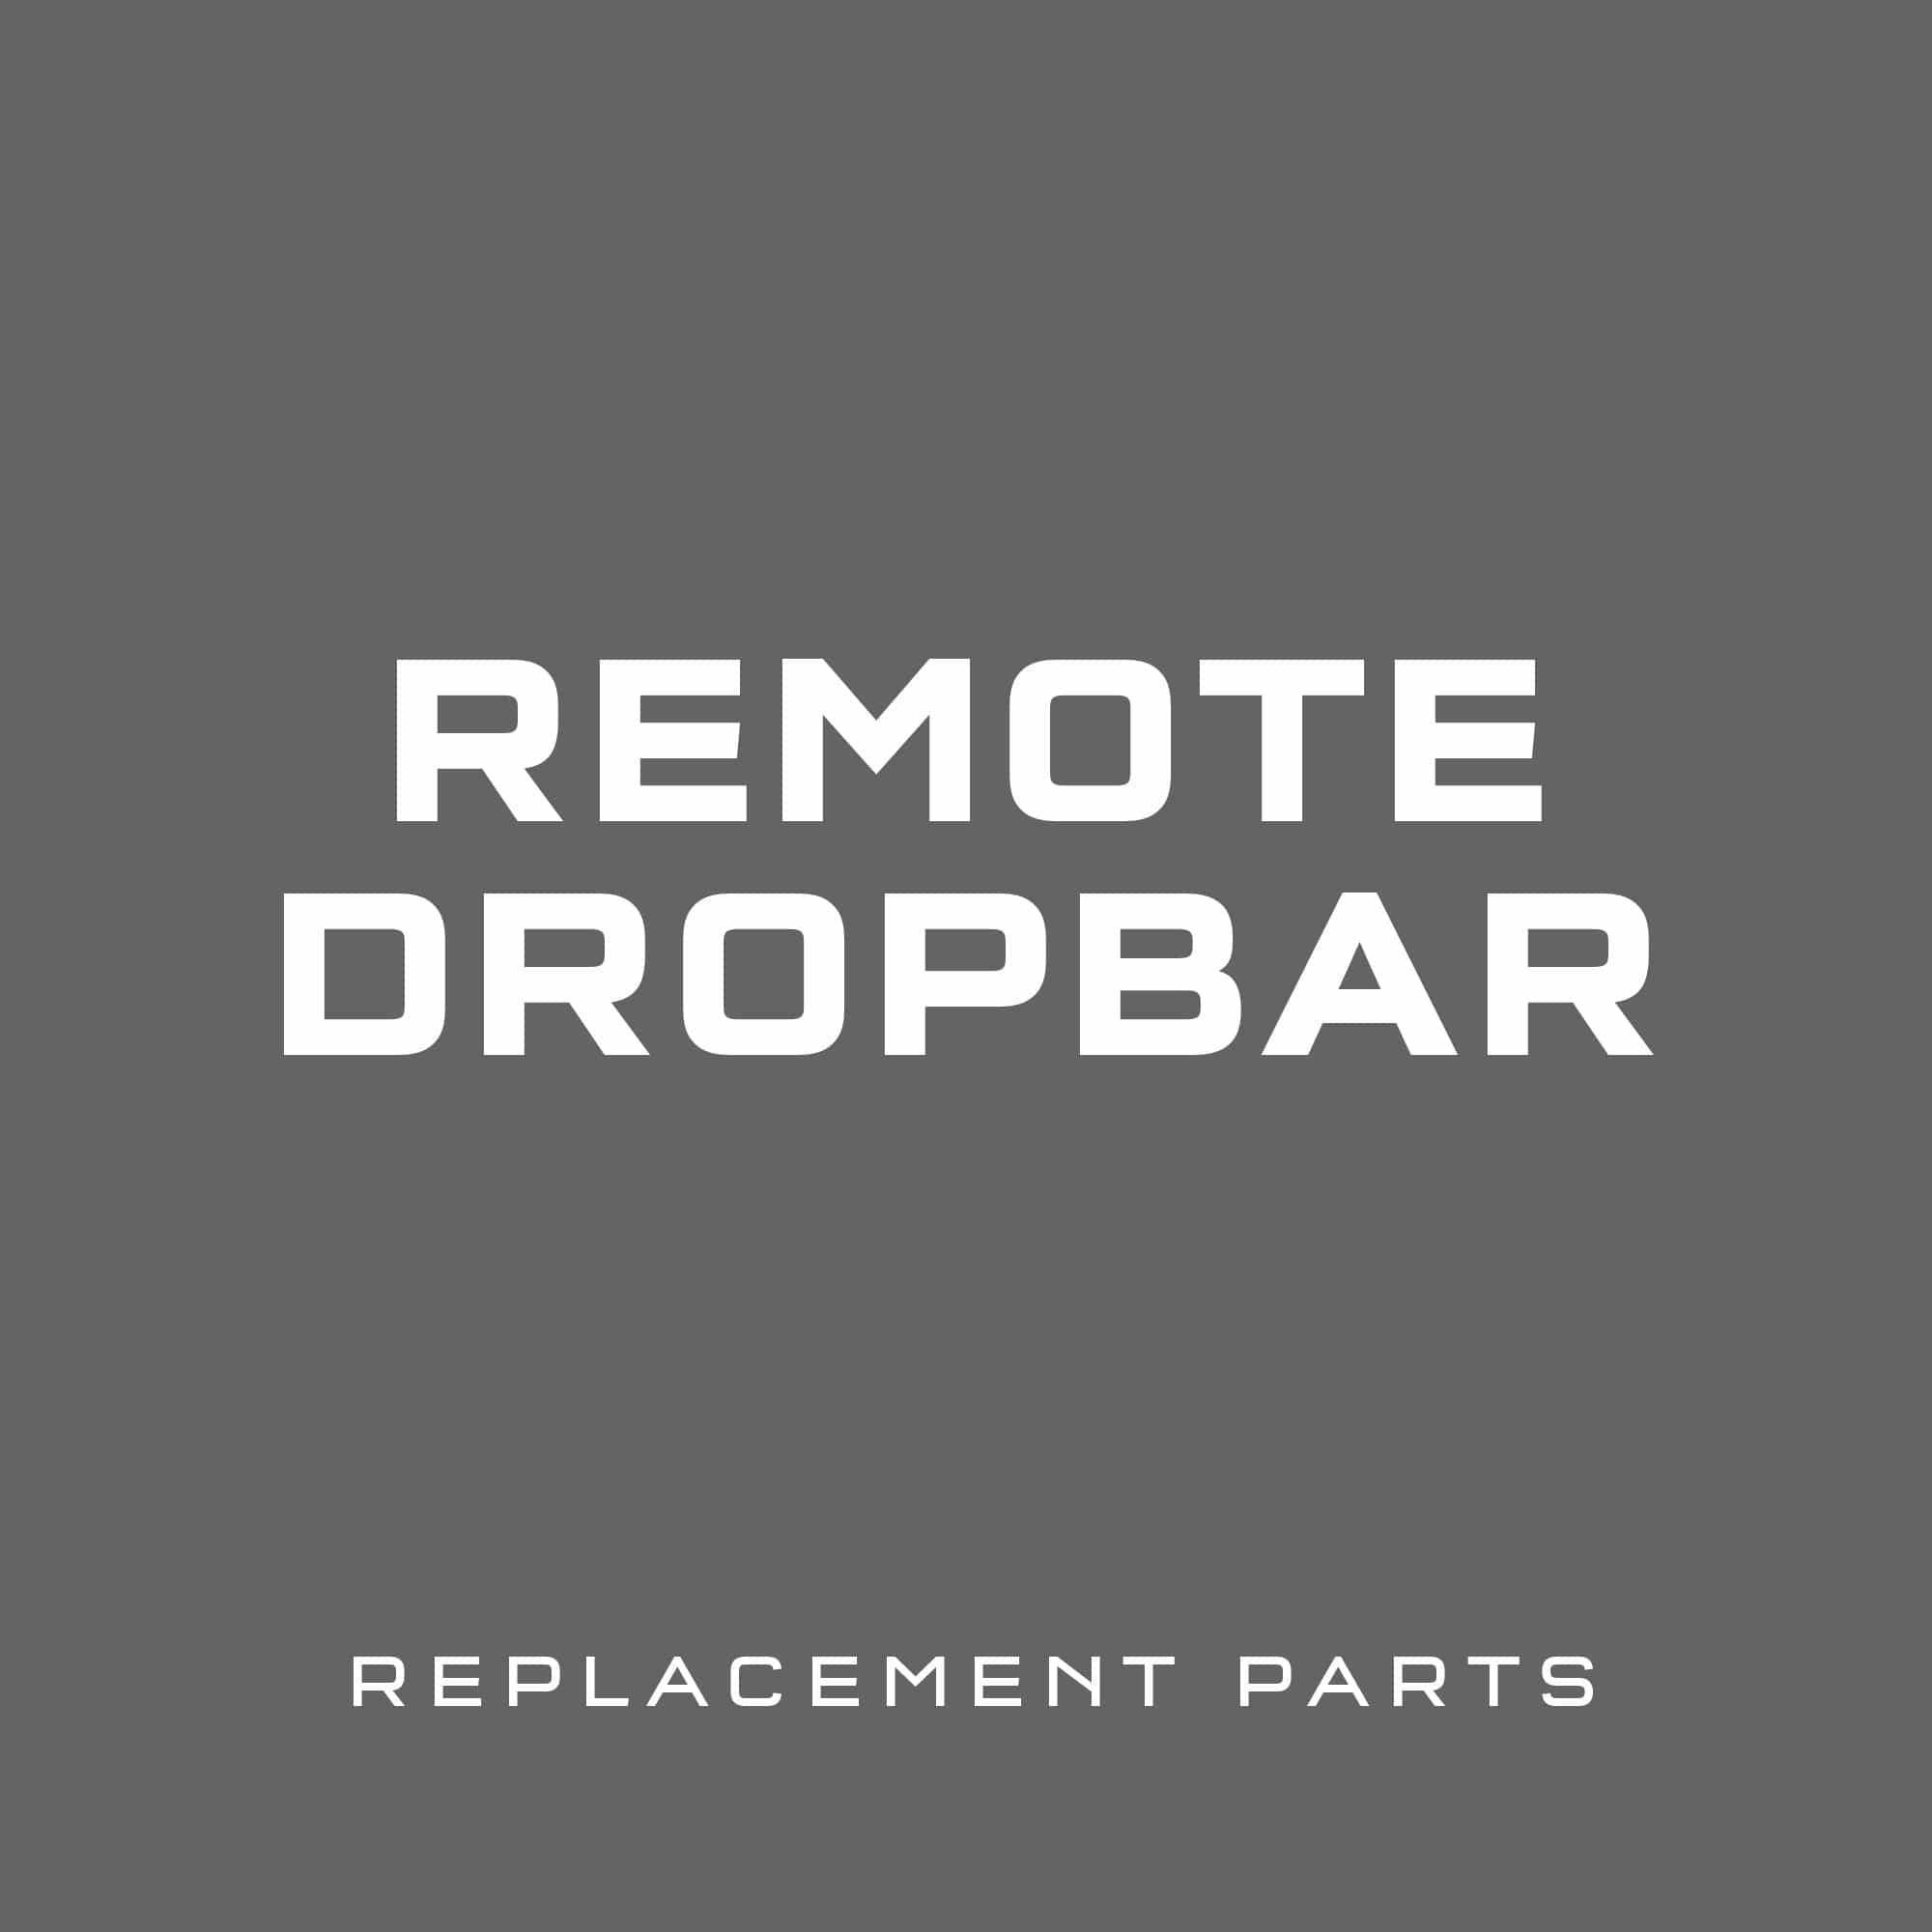 ReMote Drop Bar Replacement Parts